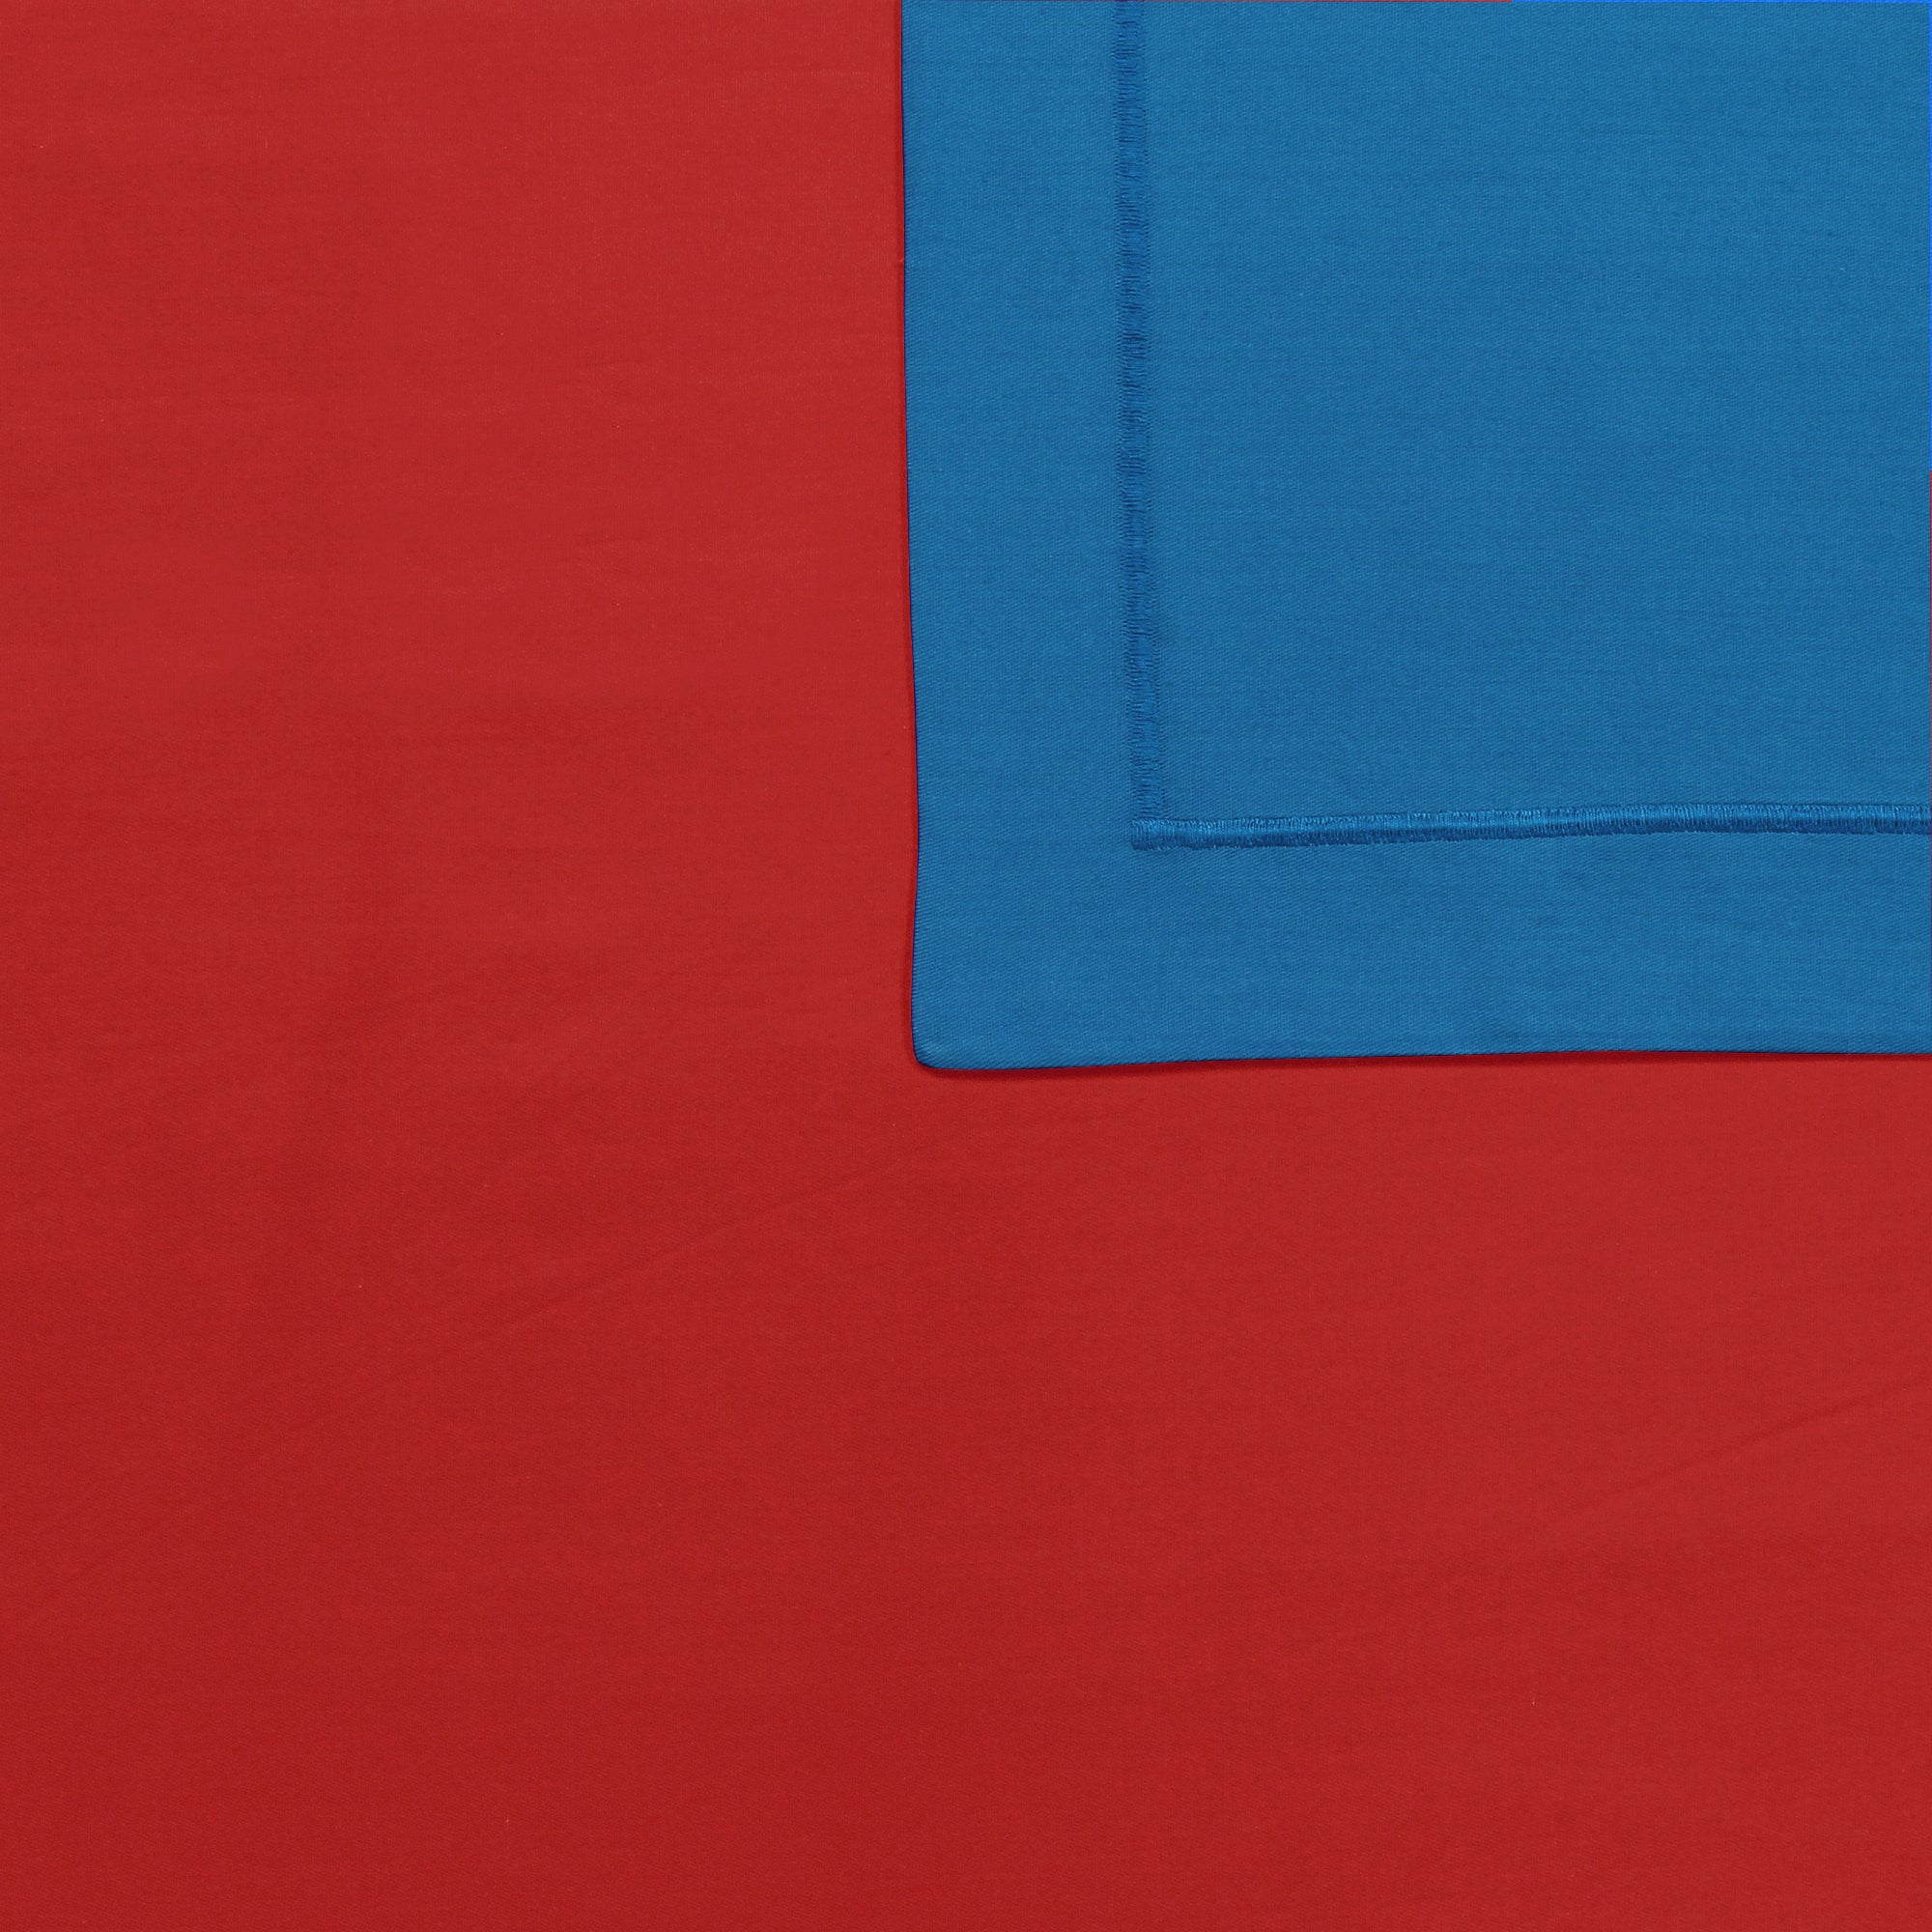 PAVO Tranquil Solid Luxurious King Bedsheet (Red and Blue)